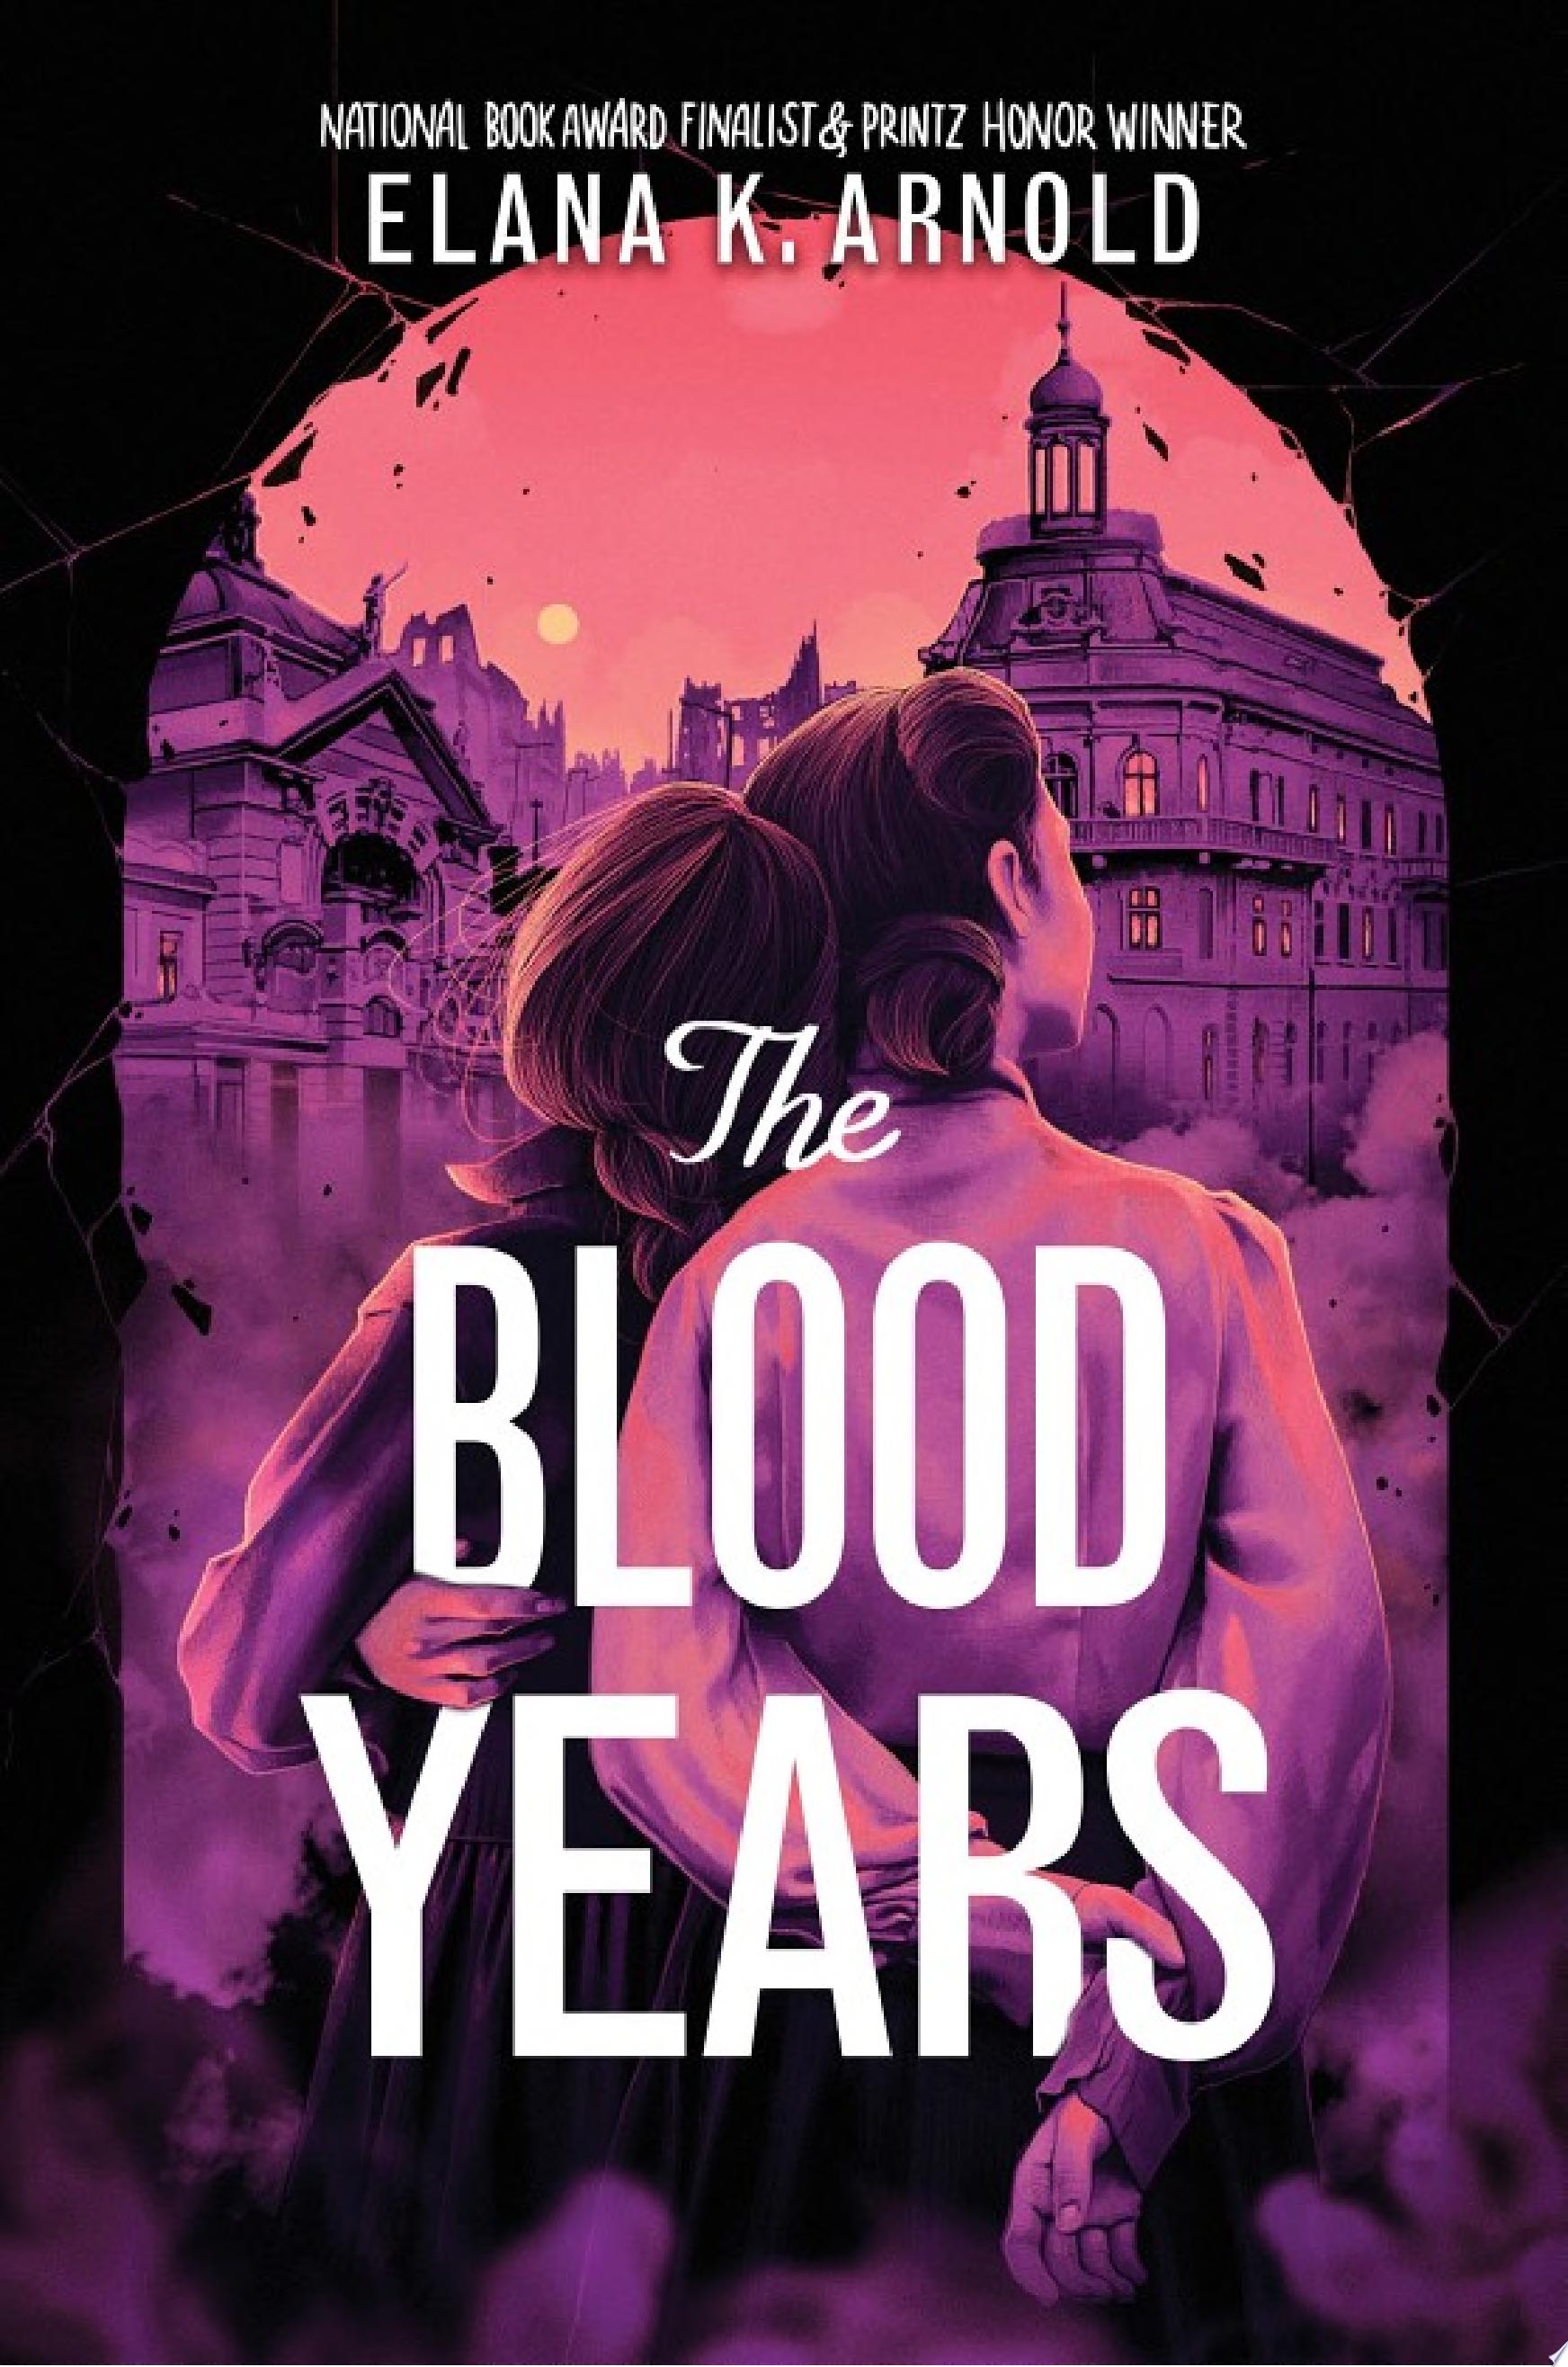 Image for "The Blood Years"